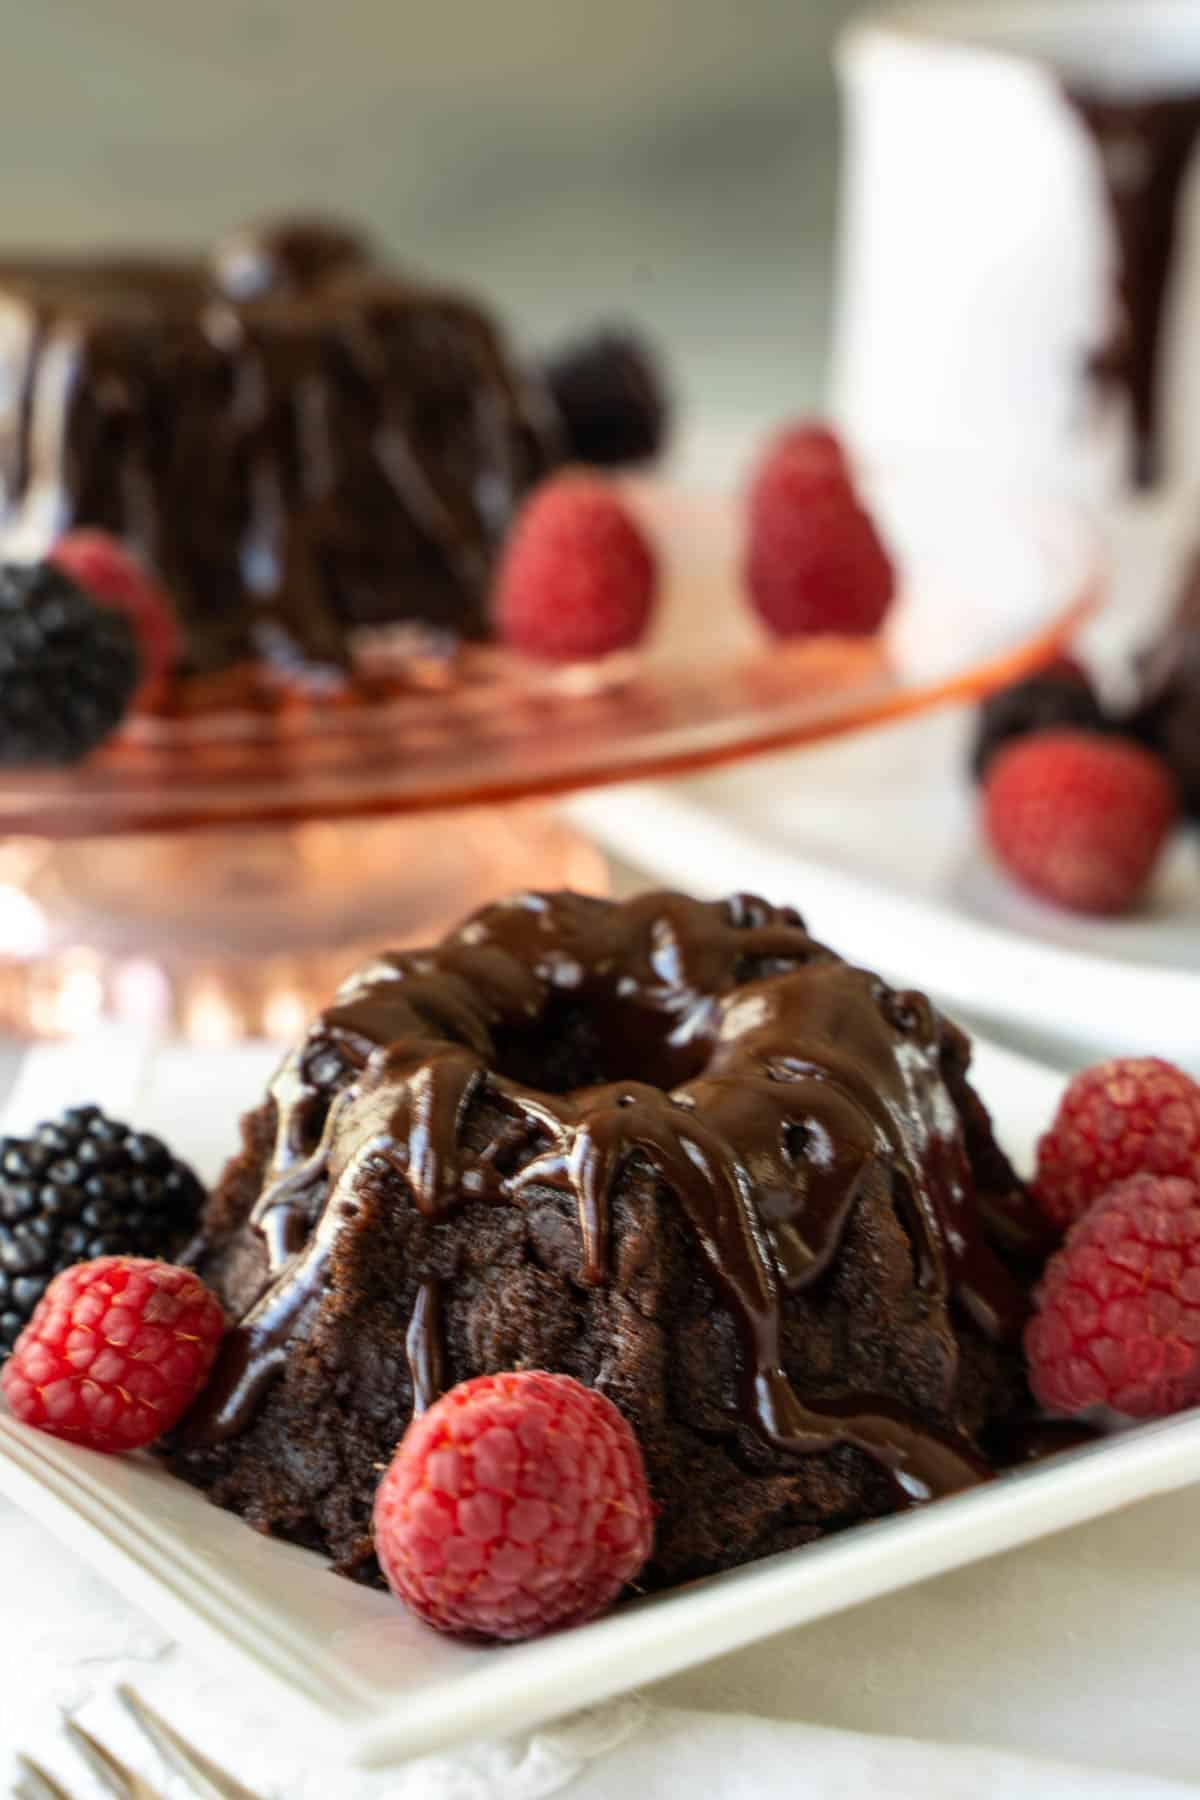 mini chocolate bundt cakes on individual plates and a cake plate garnished with raspberries and blackberries.